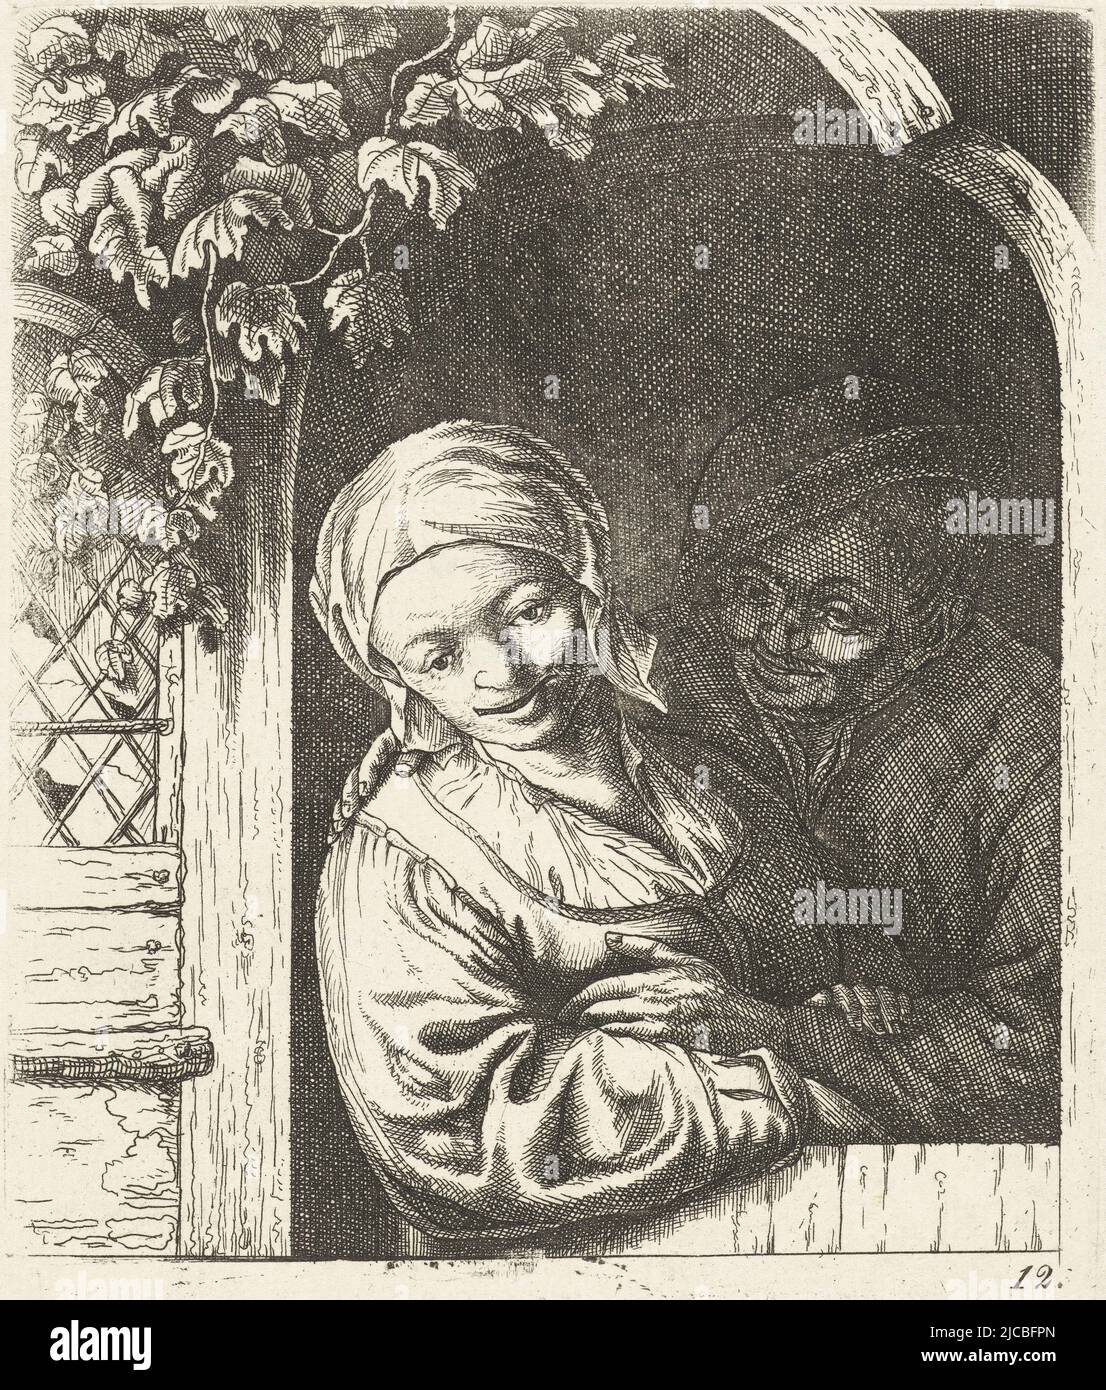 Copy of print Peasant and Peasant Woman as a Love Couple in a Doorway by Adriaen van Ostade, image reversed in mirror, Peasant and Peasant Woman as a Love Couple in a Doorway The Peasant Love Couple, Adriaen van Ostade, print maker: anonymous, Haarlem, 1650 - 1745, paper, etching, h 129 mm × w 103 mm Stock Photo